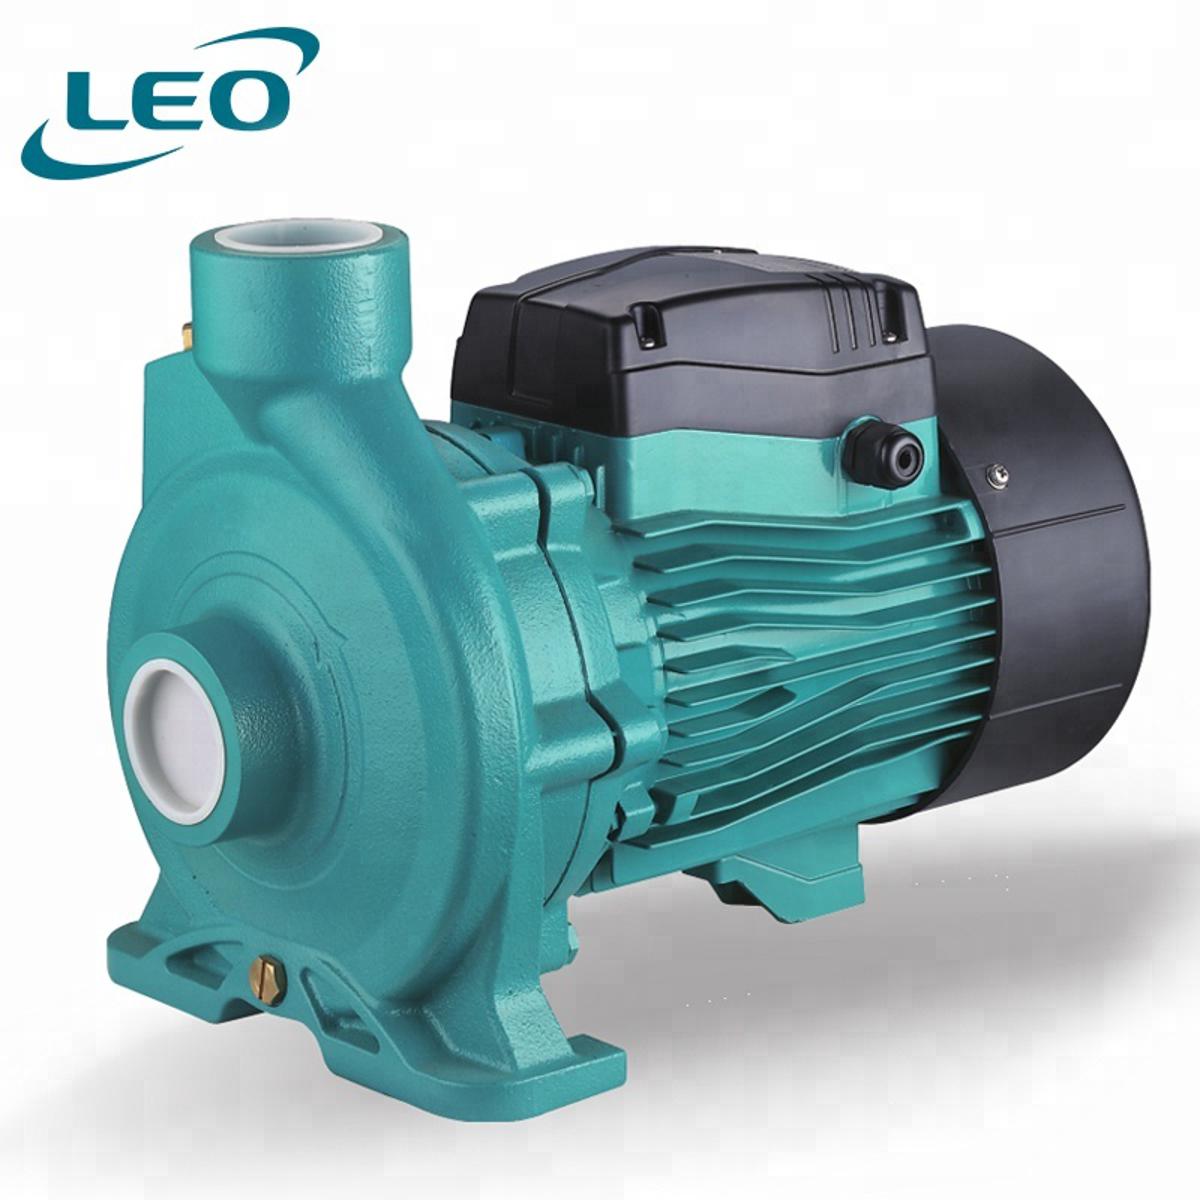 LEO - ACM-400CH2- 4000W - 5.5 HP- Clean Water Centrifugal Pump- 180V~220V SINGLE PHASE- SIZE:- 2" X 2"- ITALY Patent DESIGN European STANDARD